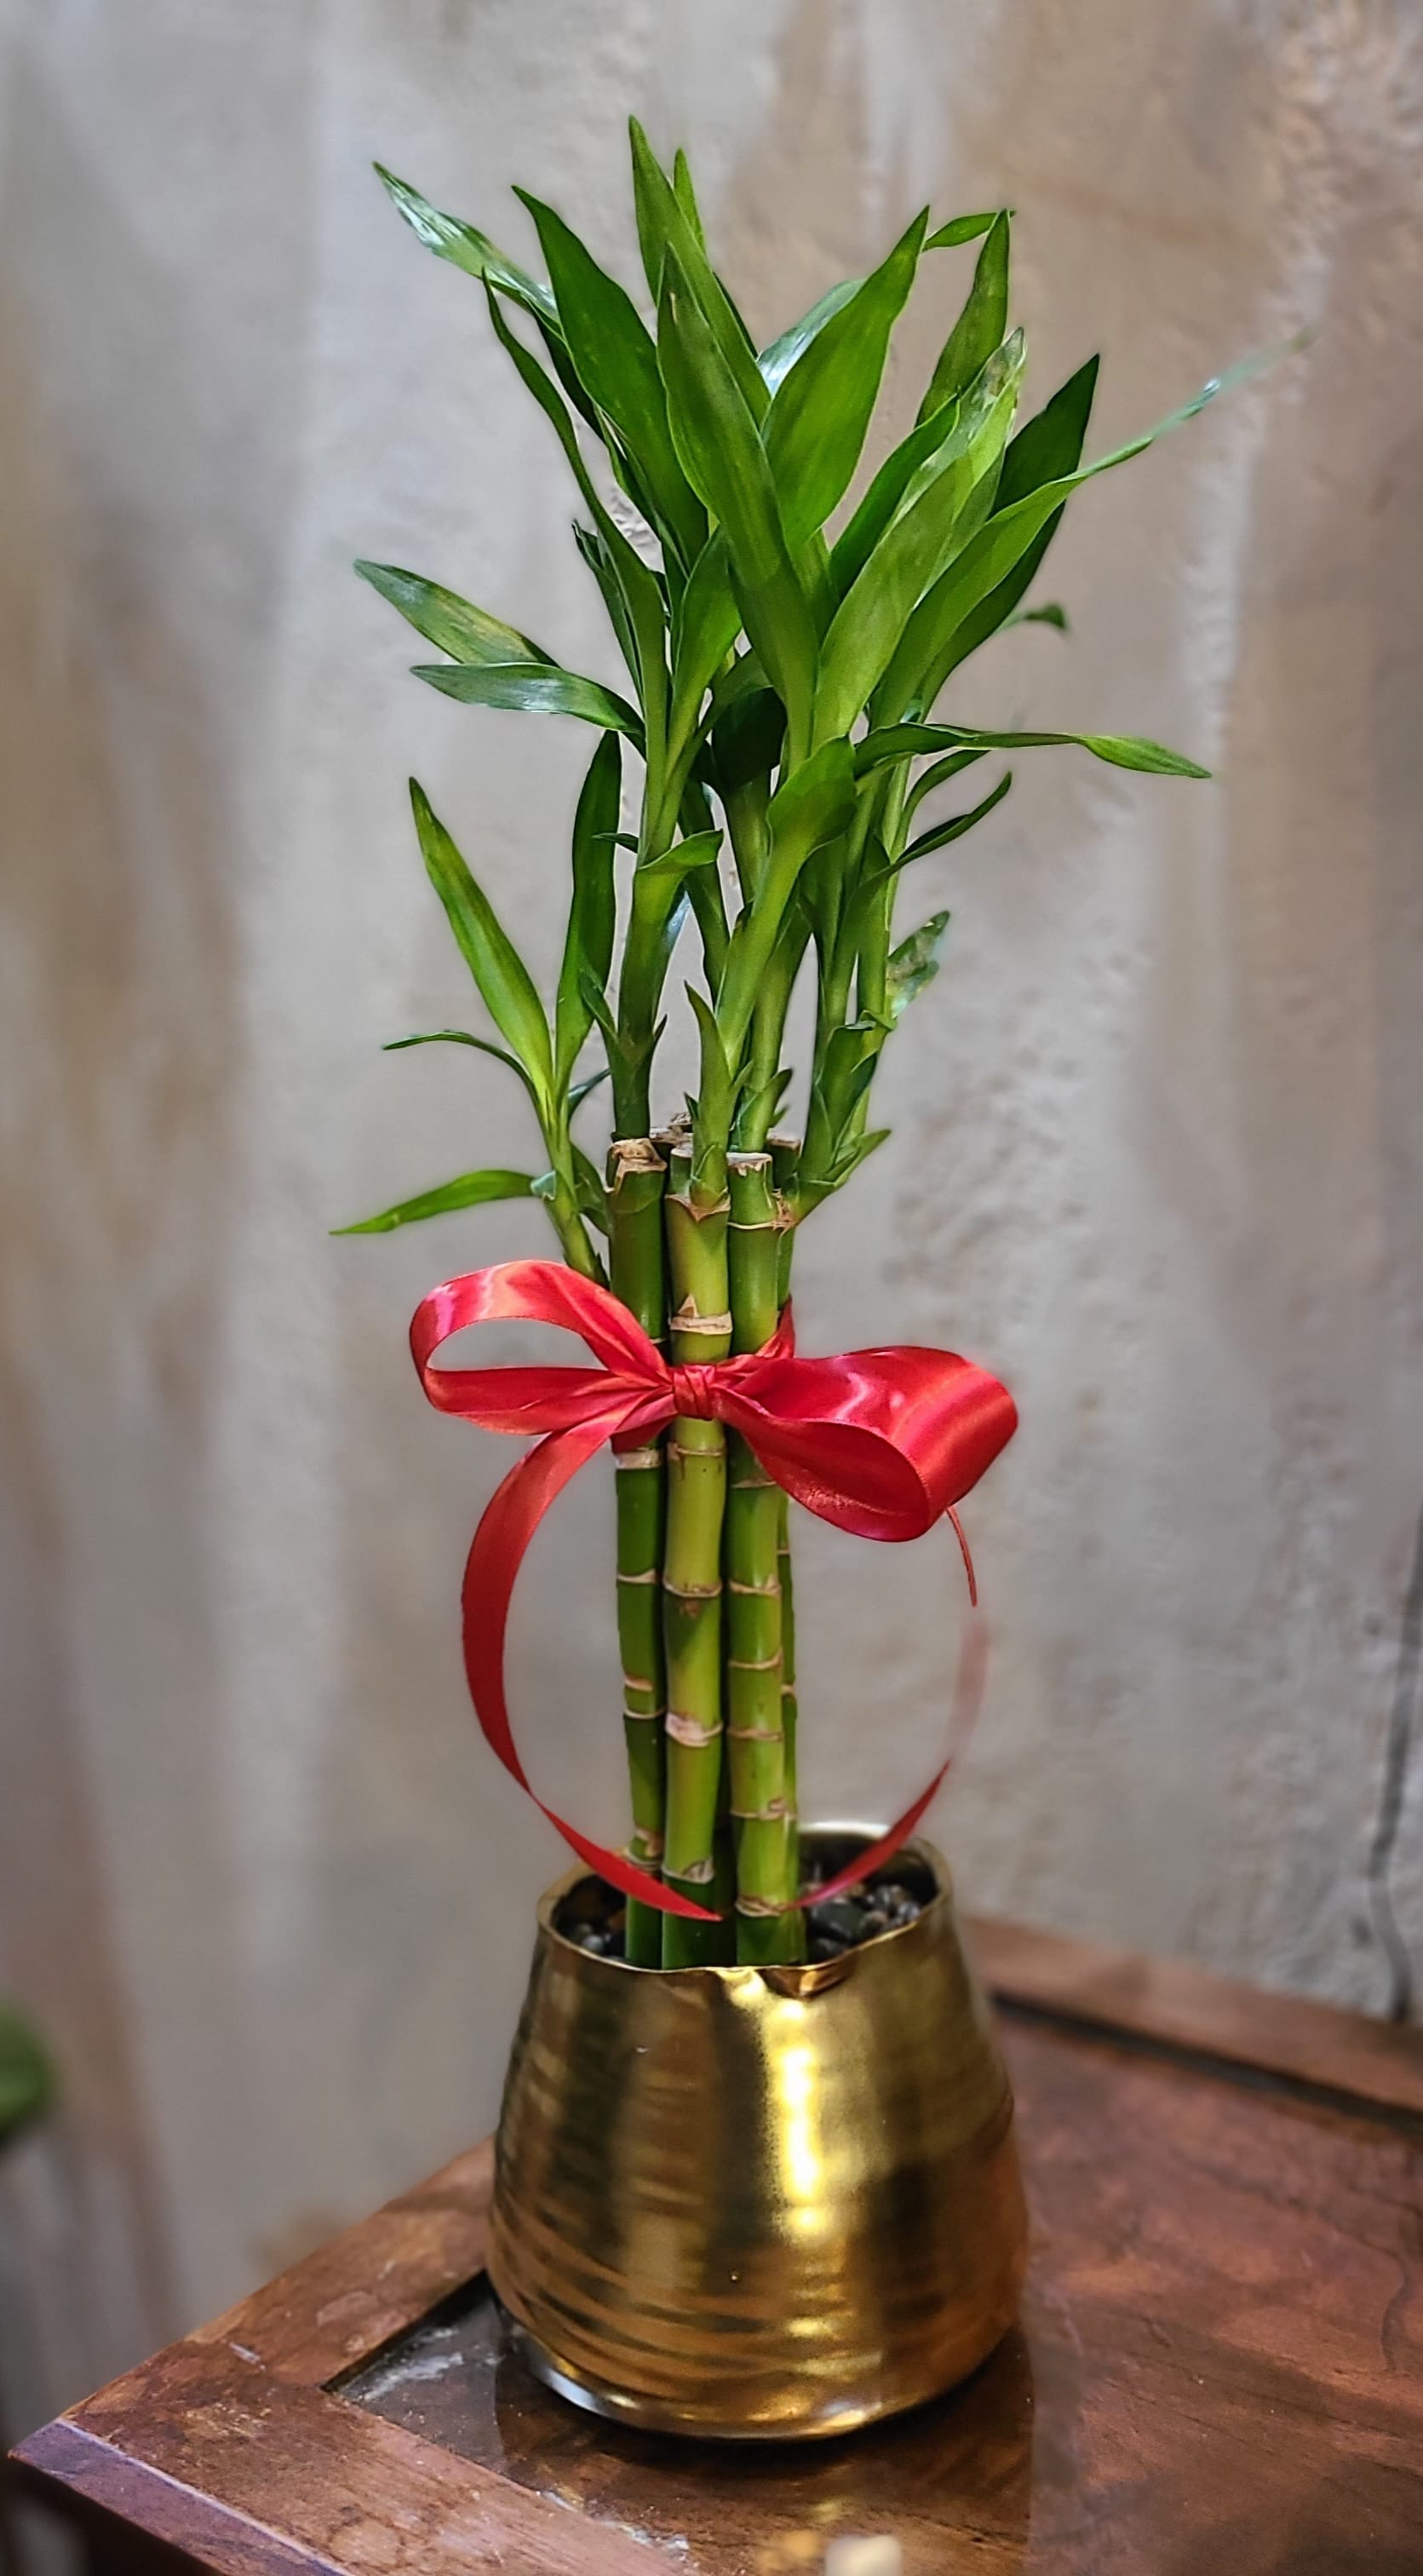 Lucky Bamboo - This bamboo arrangement is sure to bring luck and beauty into the home or office.